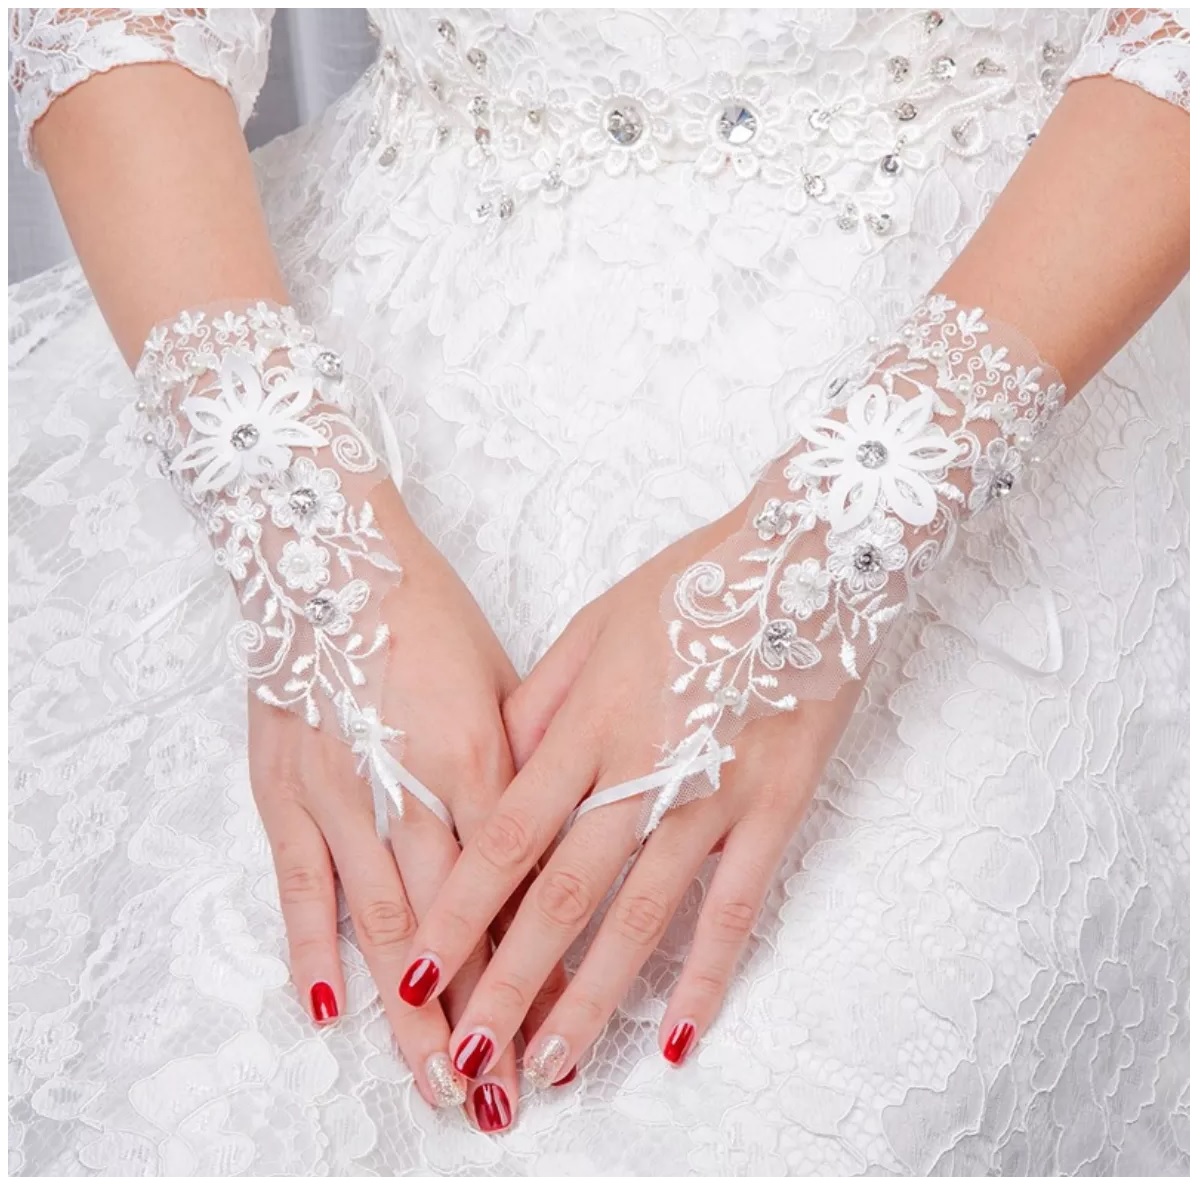 Embroidered Satin & Lace Bridal Gloves - Floral Lace Gloves studded with glittering crystals - White